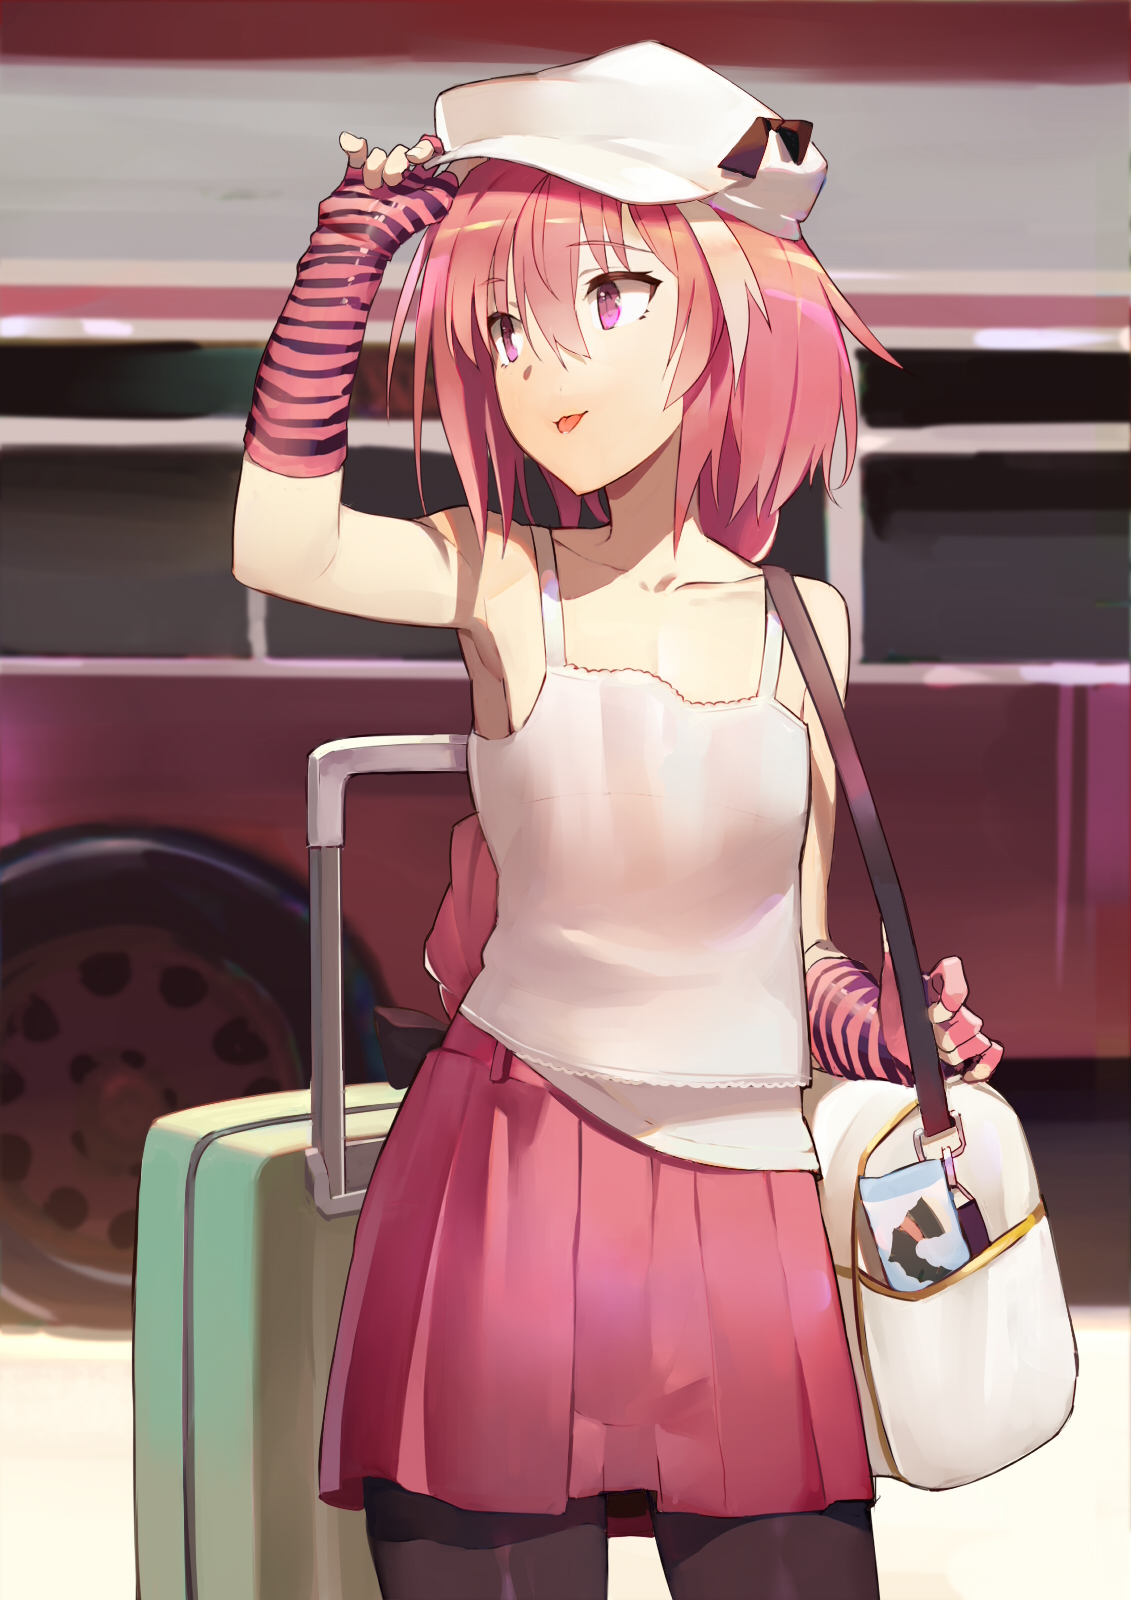 Anime 1131x1600 Fate series Fate/Apocrypha  anime boys Astolfo (Fate/Apocrypha) Fate/Grand Order 2D pantyhose thighs tongue out femboy armpits pink hair long hair pink eyes buses fan art vehicle anime Pixiv anime girls skirt hat crossdressing